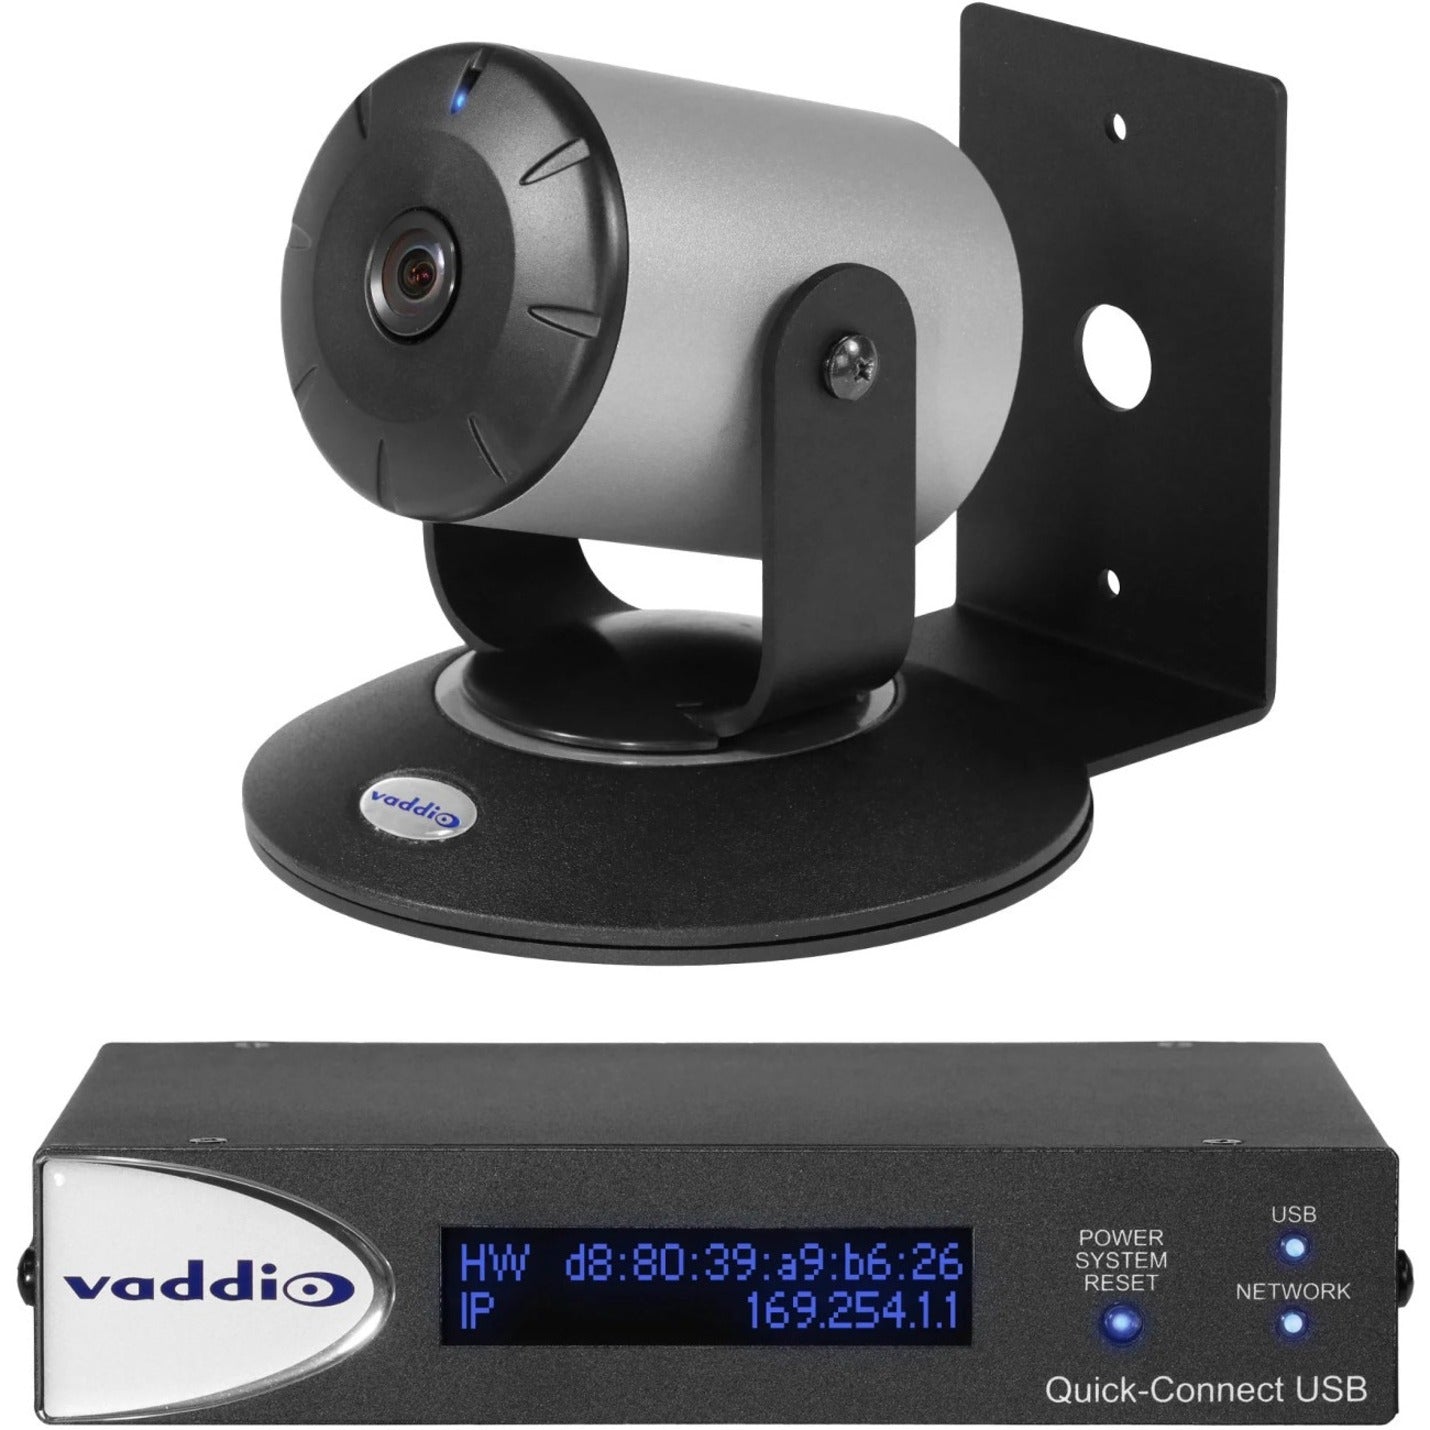 Vaddio 999-6911-200 WideSHOT SE Fixed Wide Angle Camera, High-Quality Video Conferencing Solution